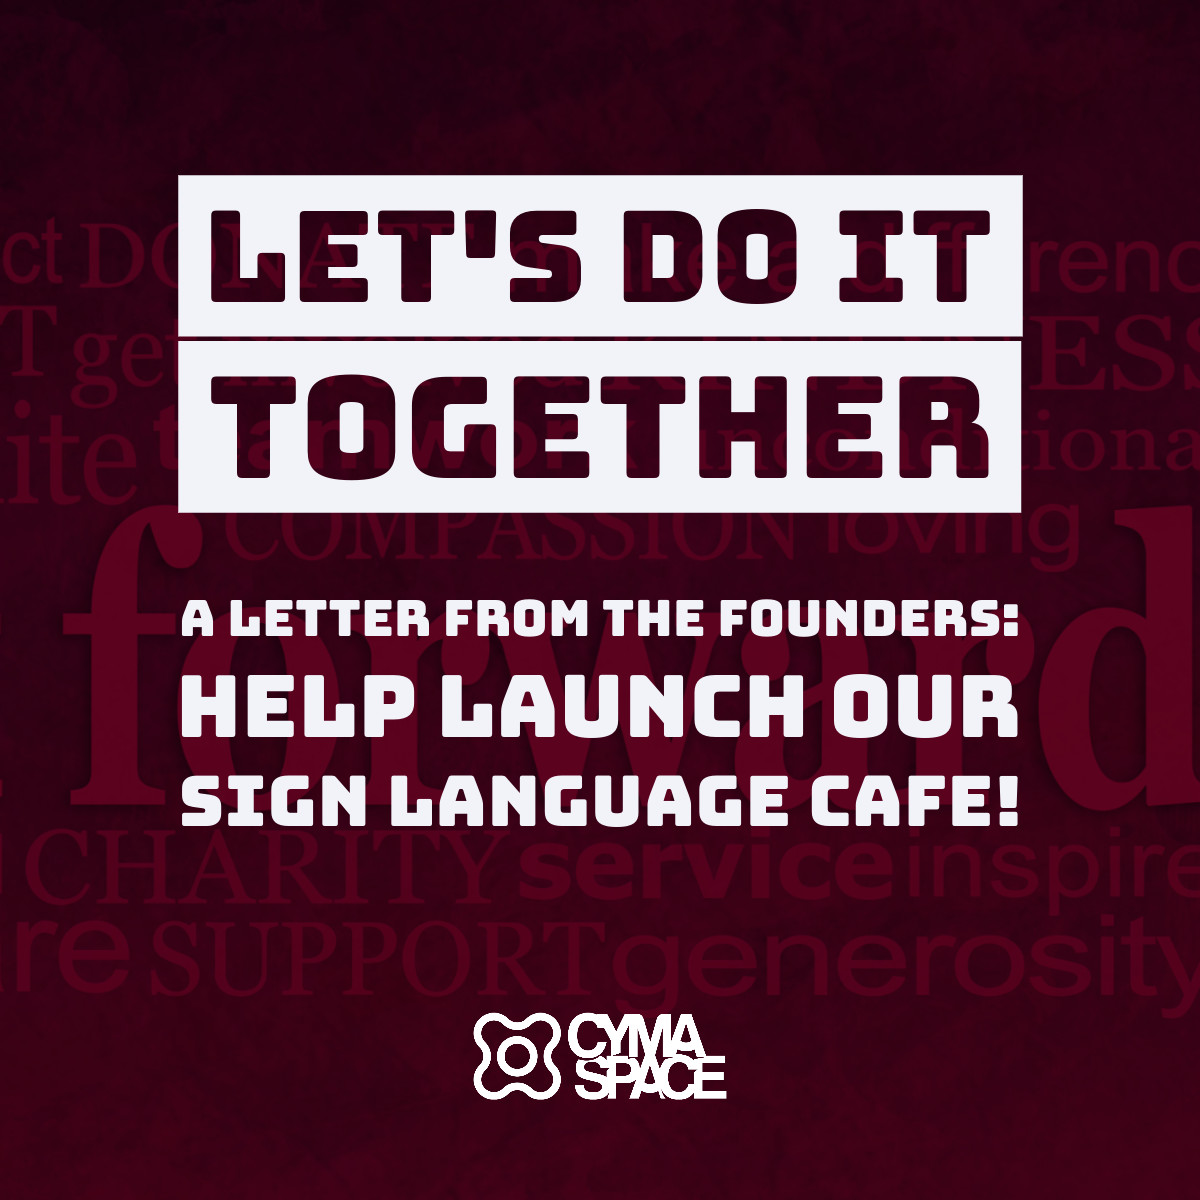 Let's Do It Together. A hetter from the founders: Help Launch Our Sign Language Cafe!